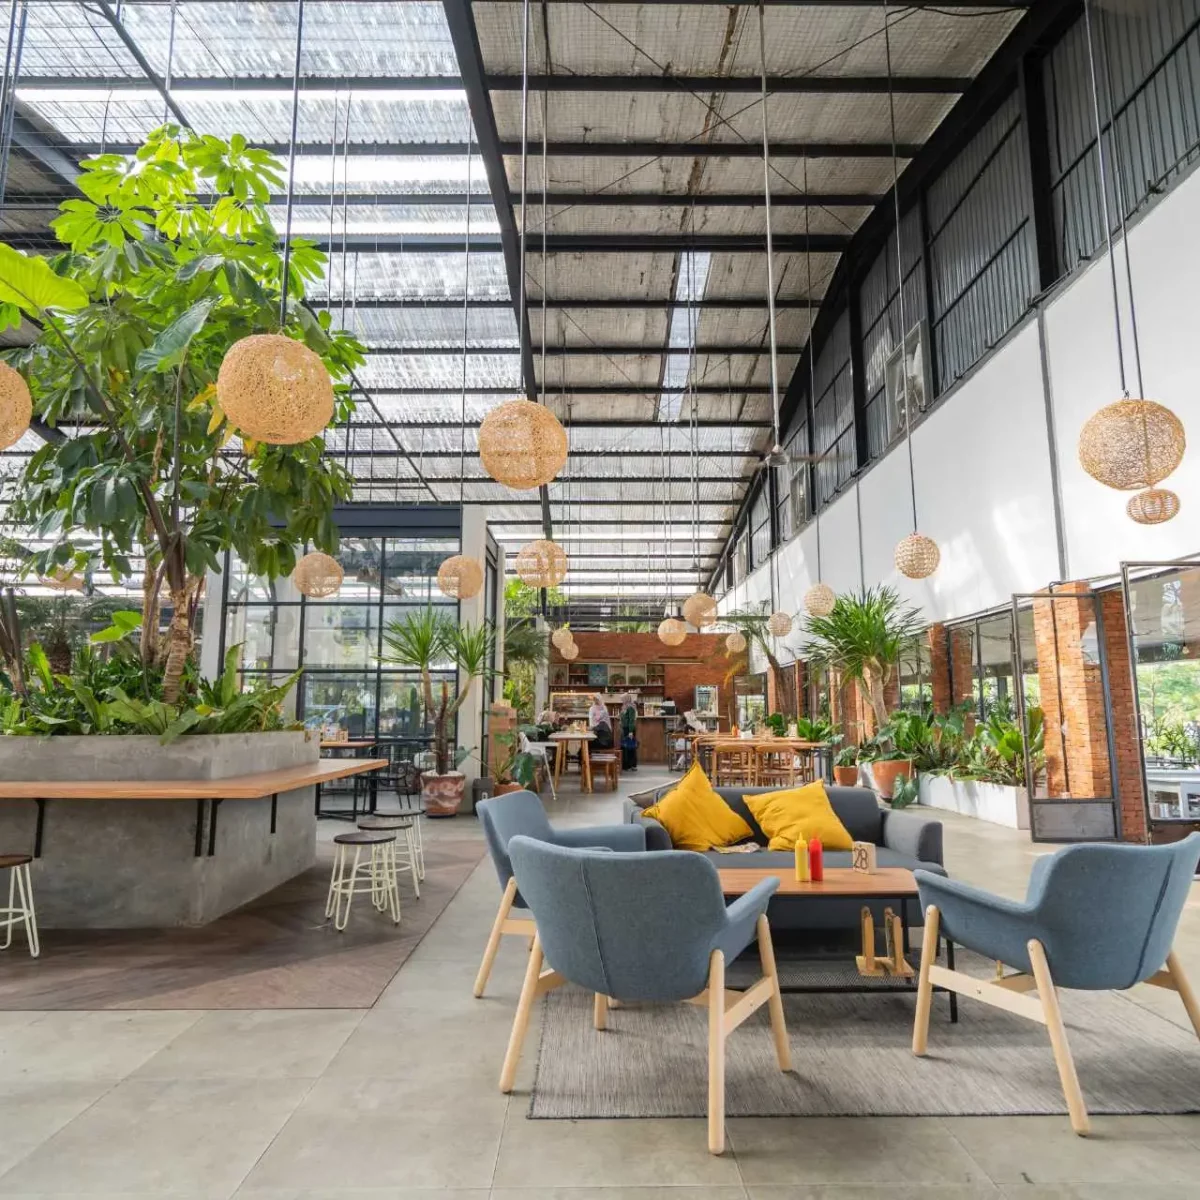 Open office space with lots of green plants and tables